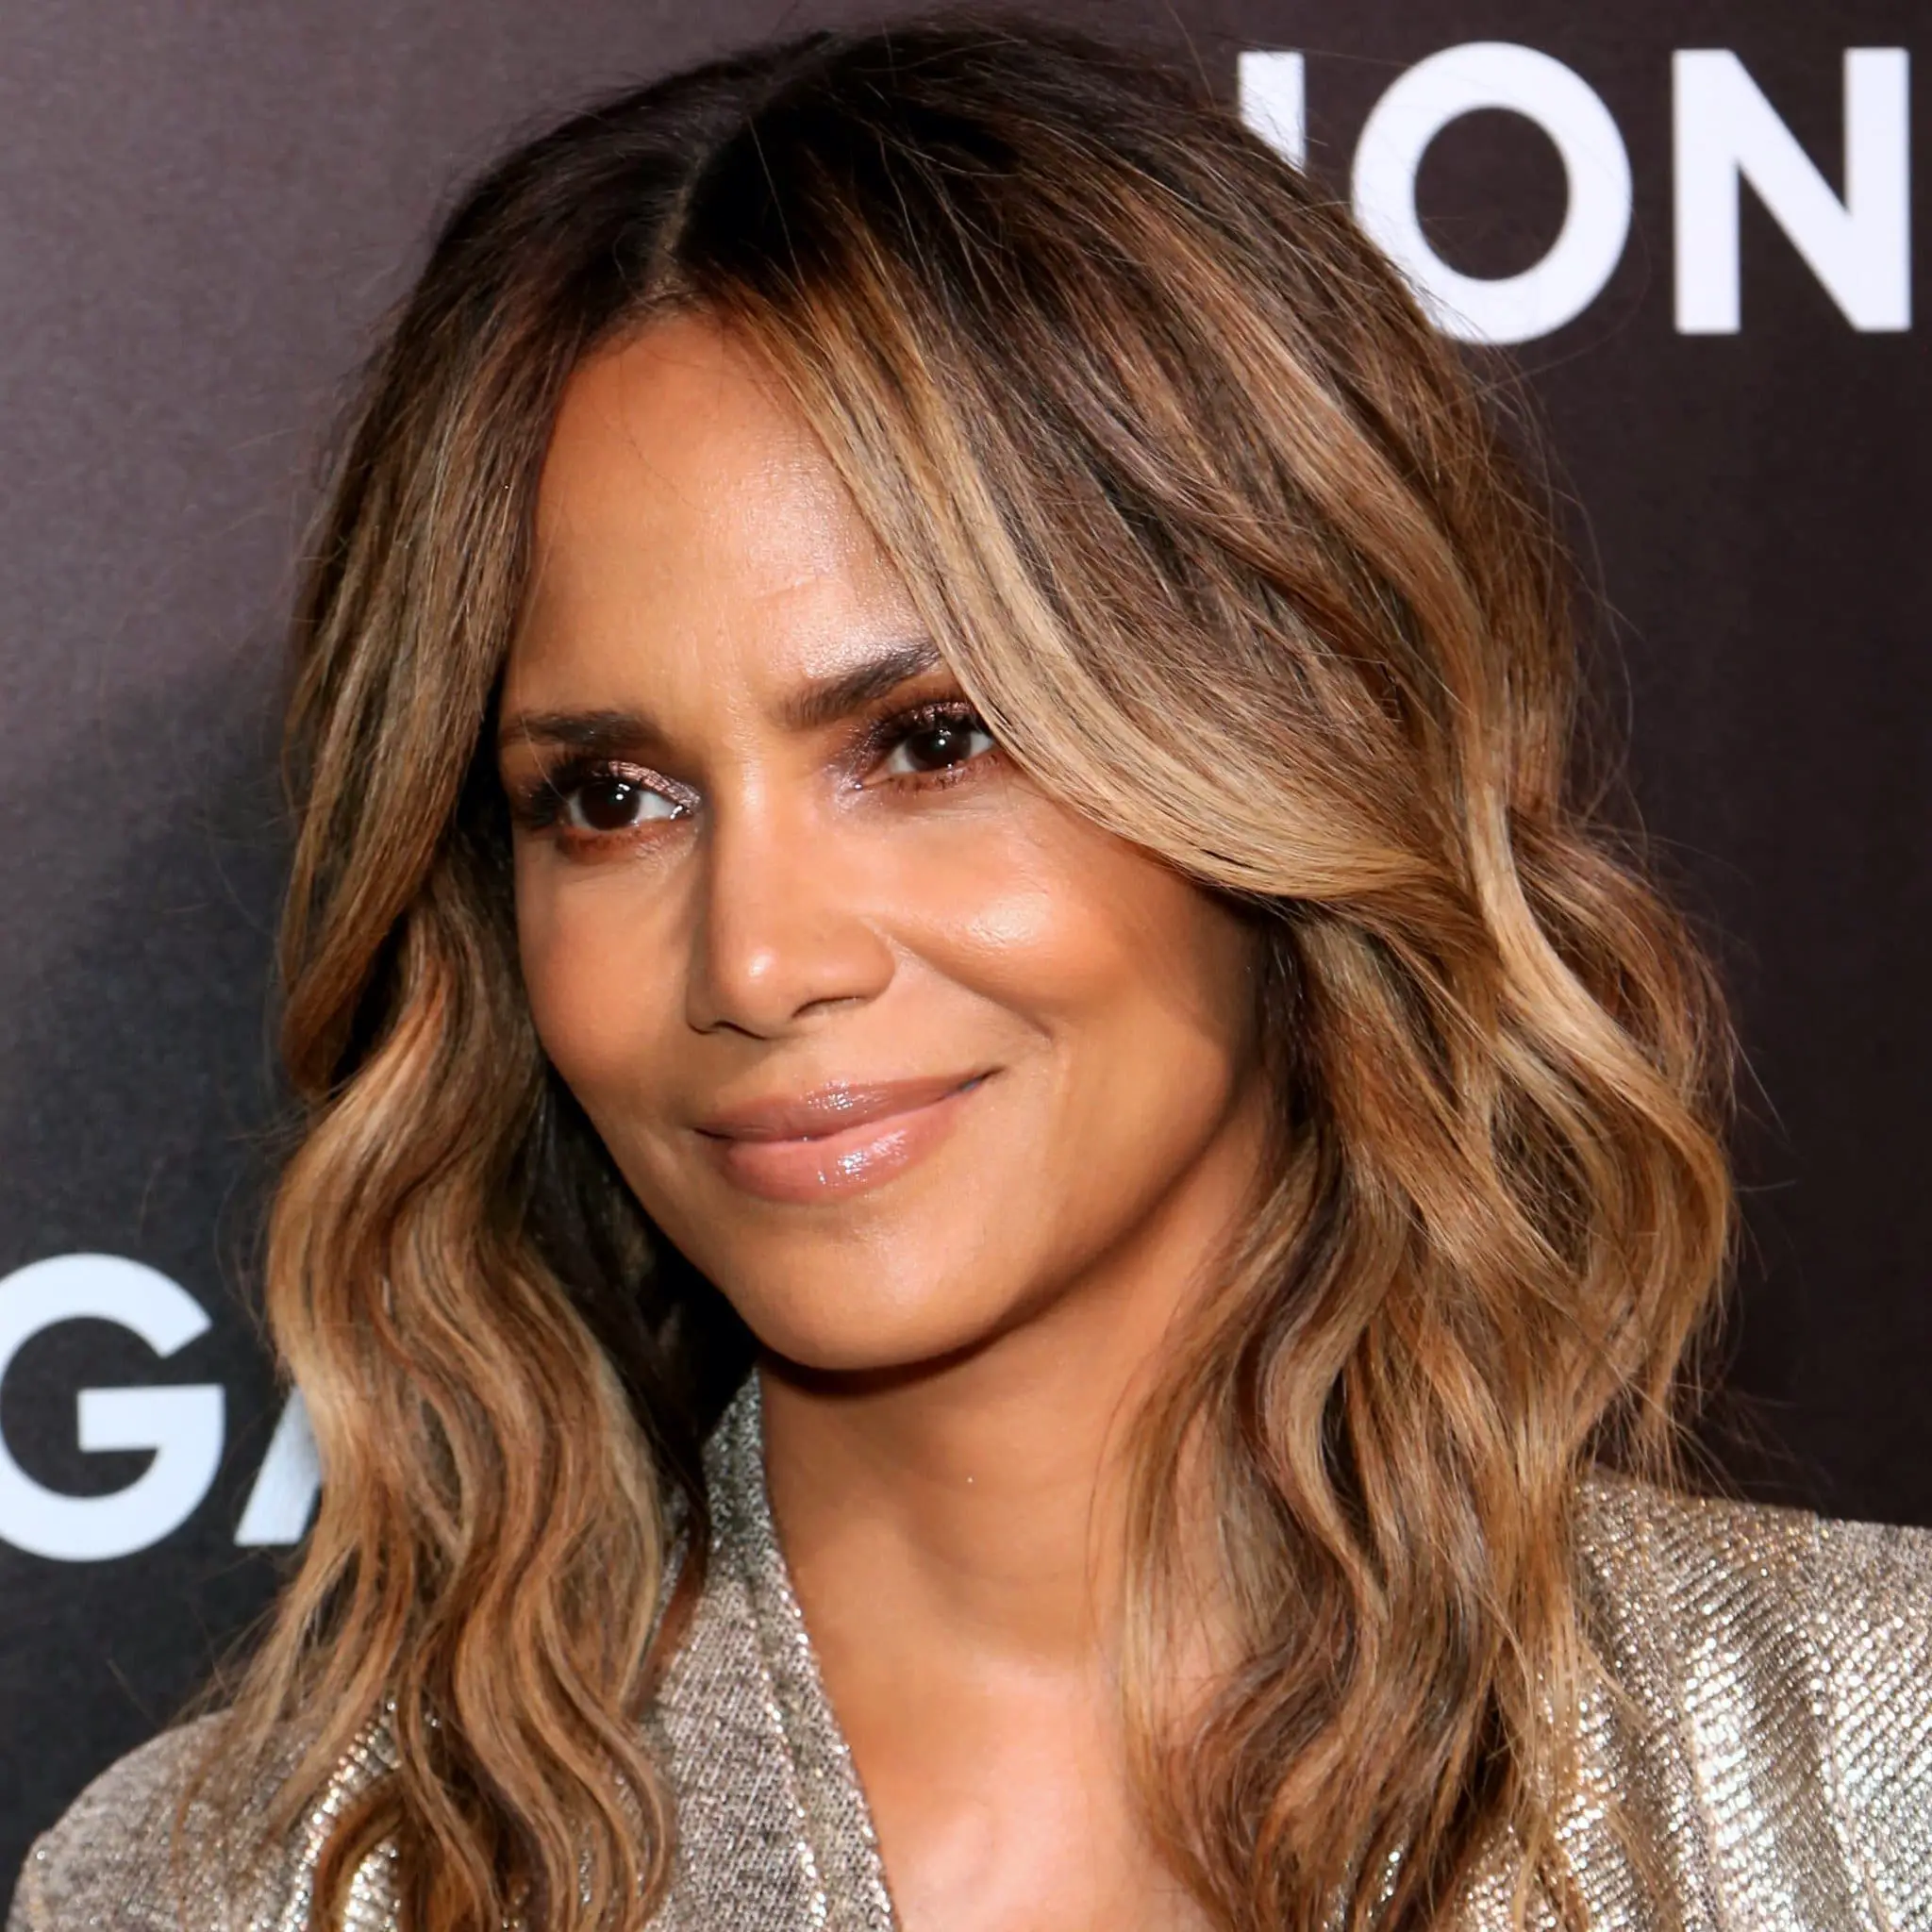 Halle Berry Movies Bio Age Height Husband Spouse Kids Daughter Catwoman Net Worth And Tv Shows